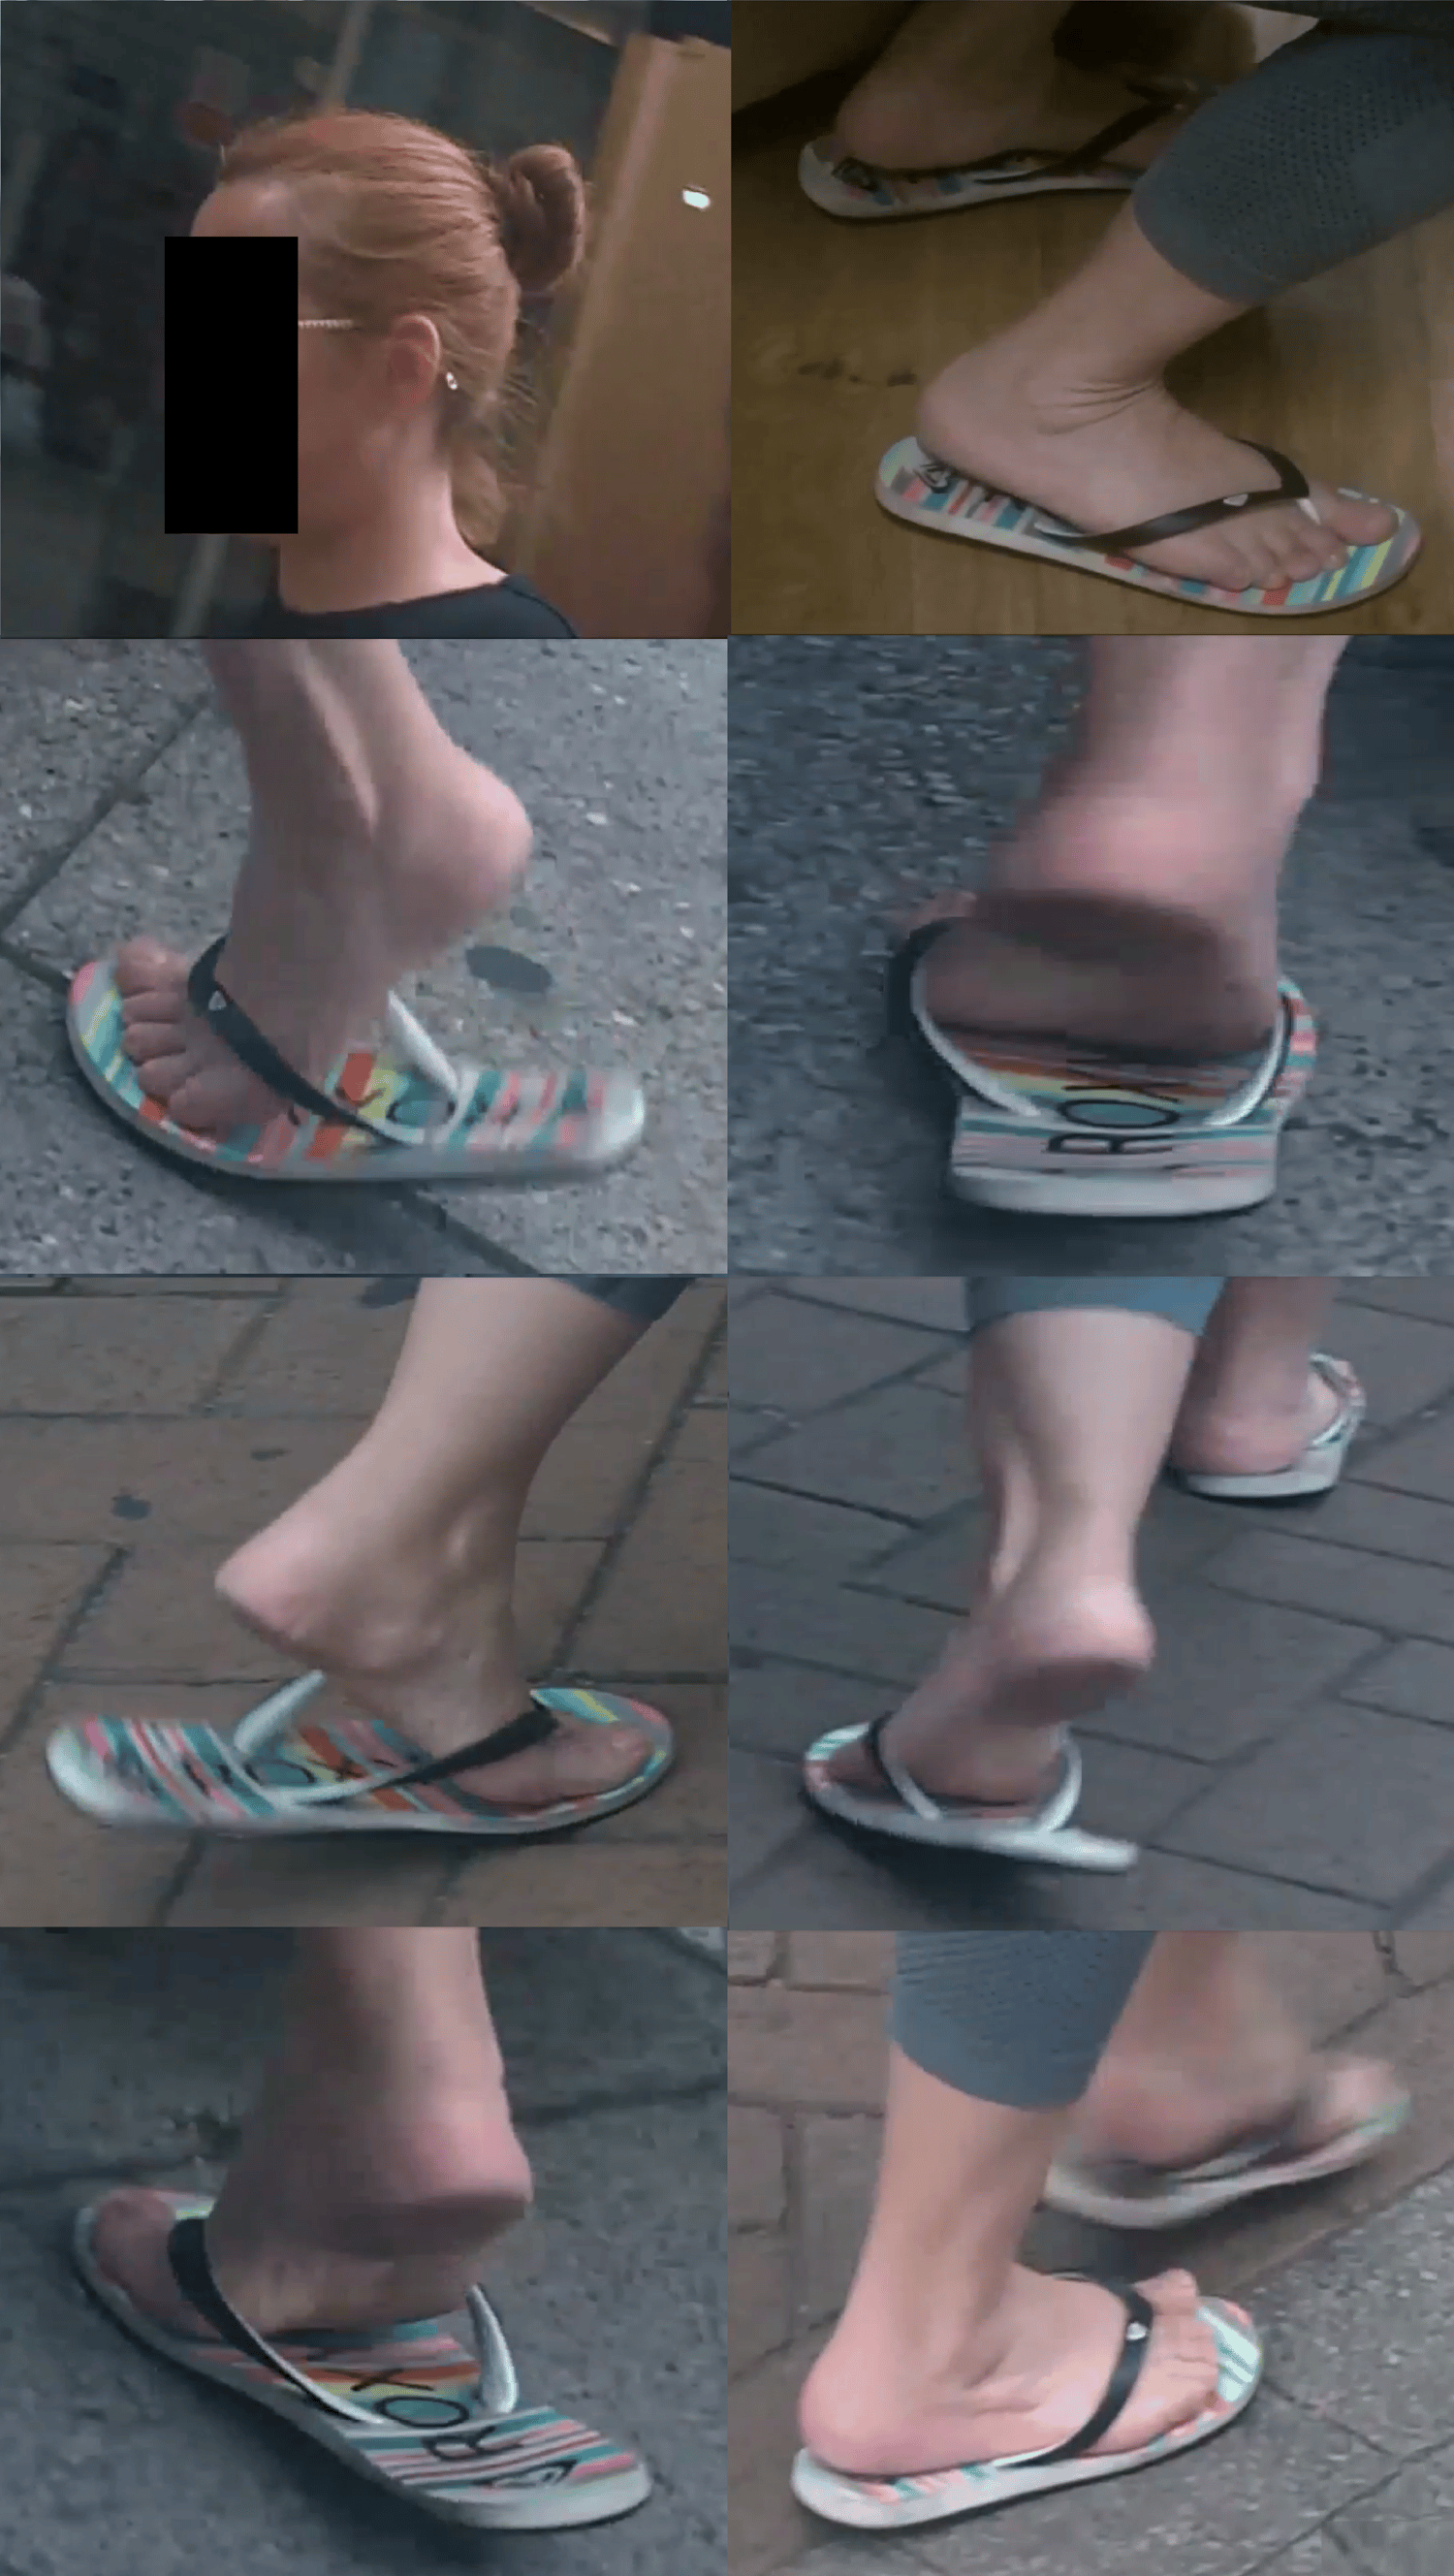 Foreign Blonde MILF Pale Toned Feet Toes & Soles Exposure In White Pink  Strap Flip Flops (Long Walk Candid Day Three) - Payhip